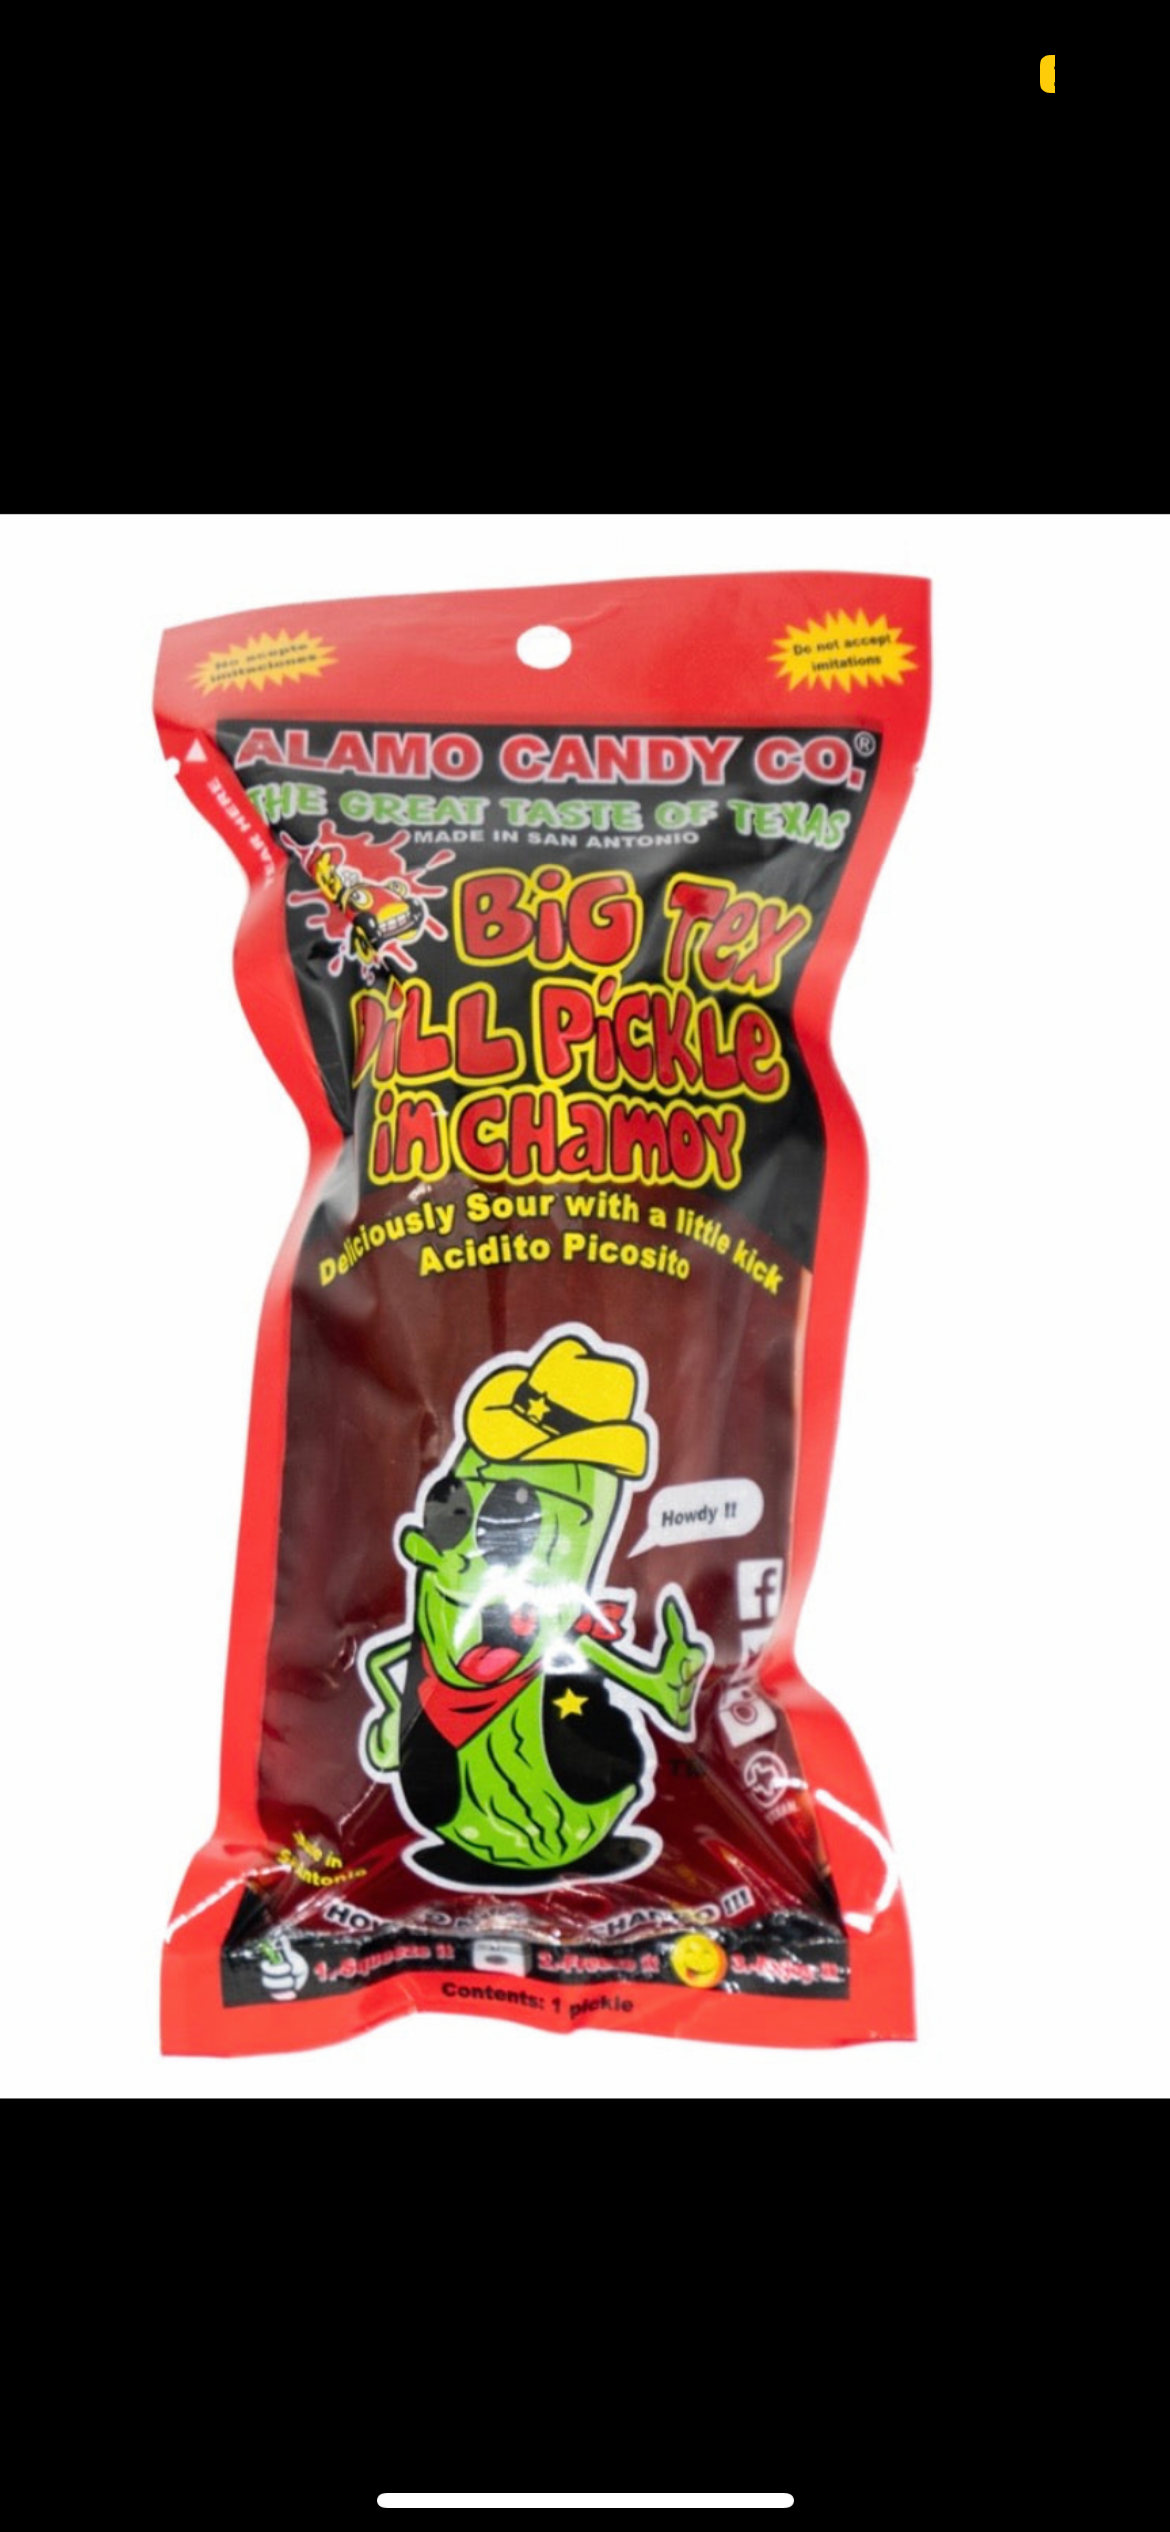 Texas dill pickle Chamoy kit